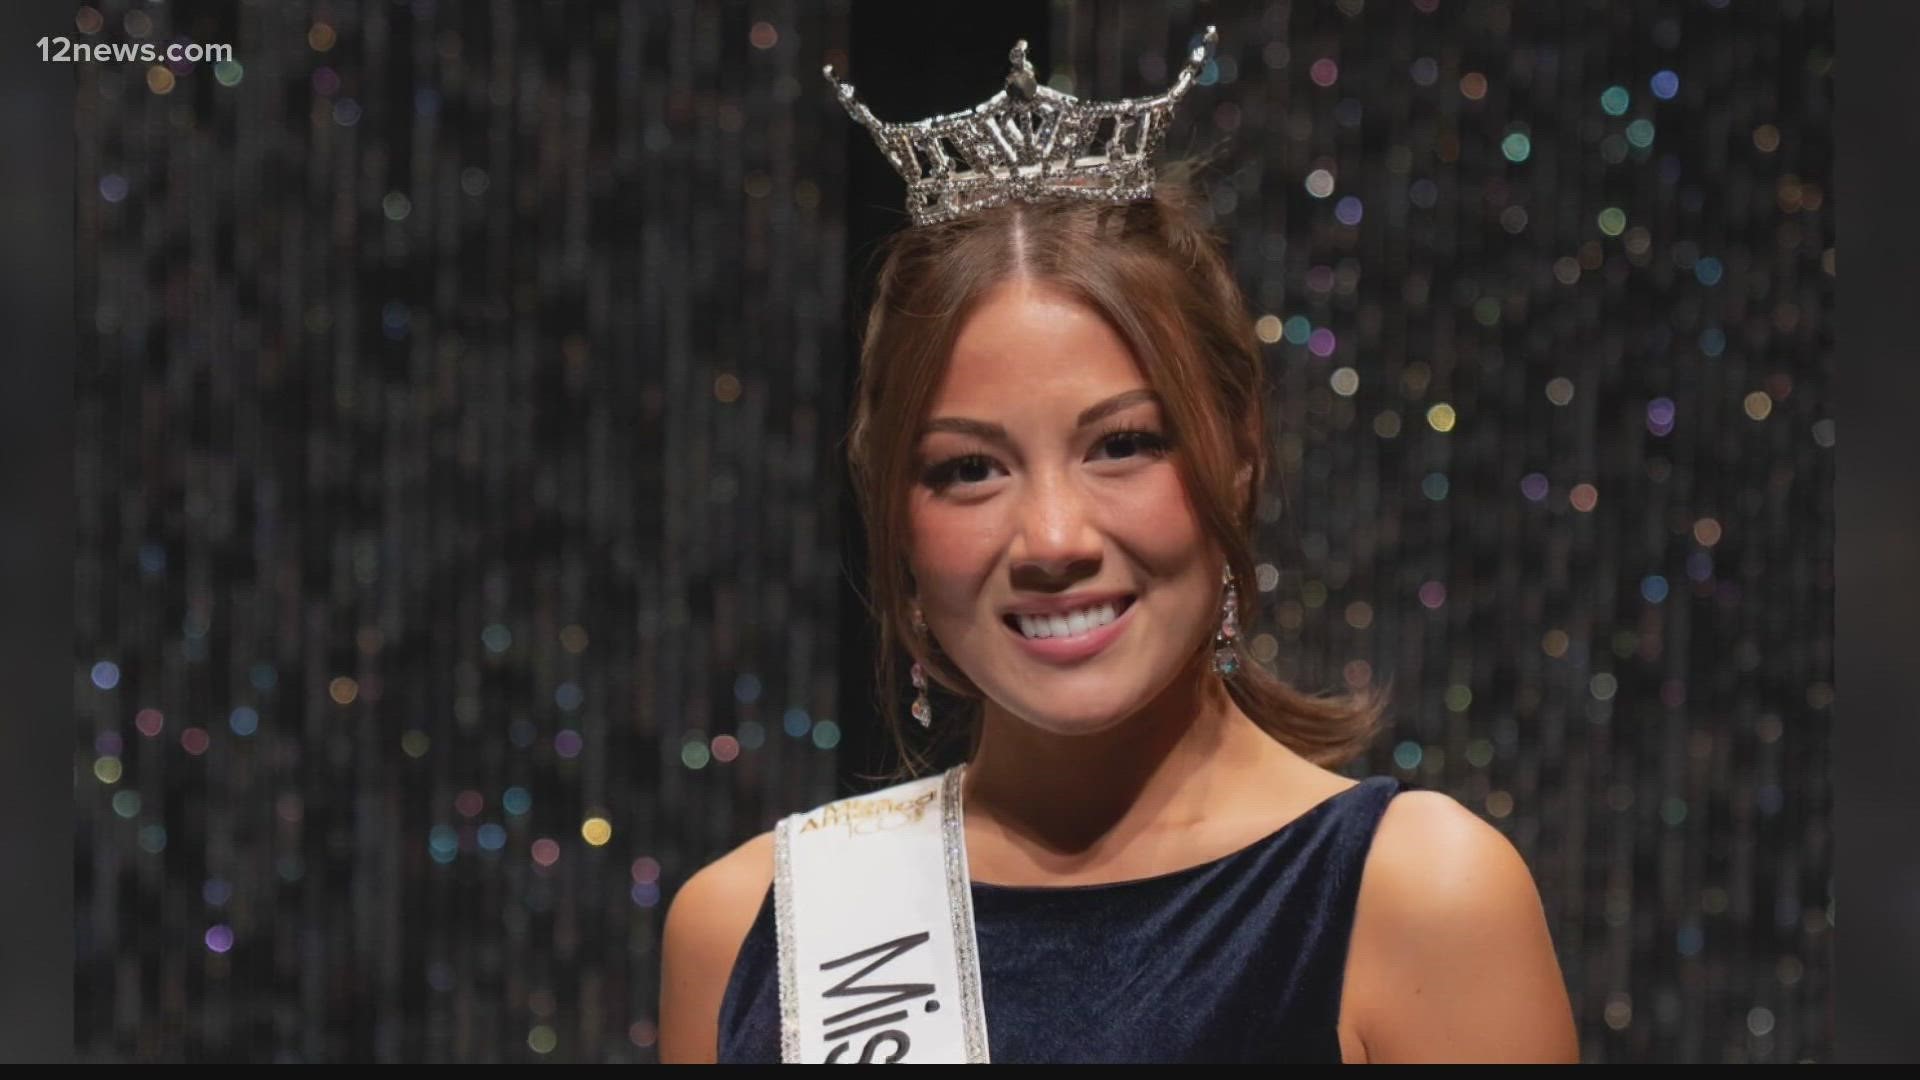 Emma Broyles, an Alaska native and ASU honors student, was named Miss America at the 2022 competition Thursday night.